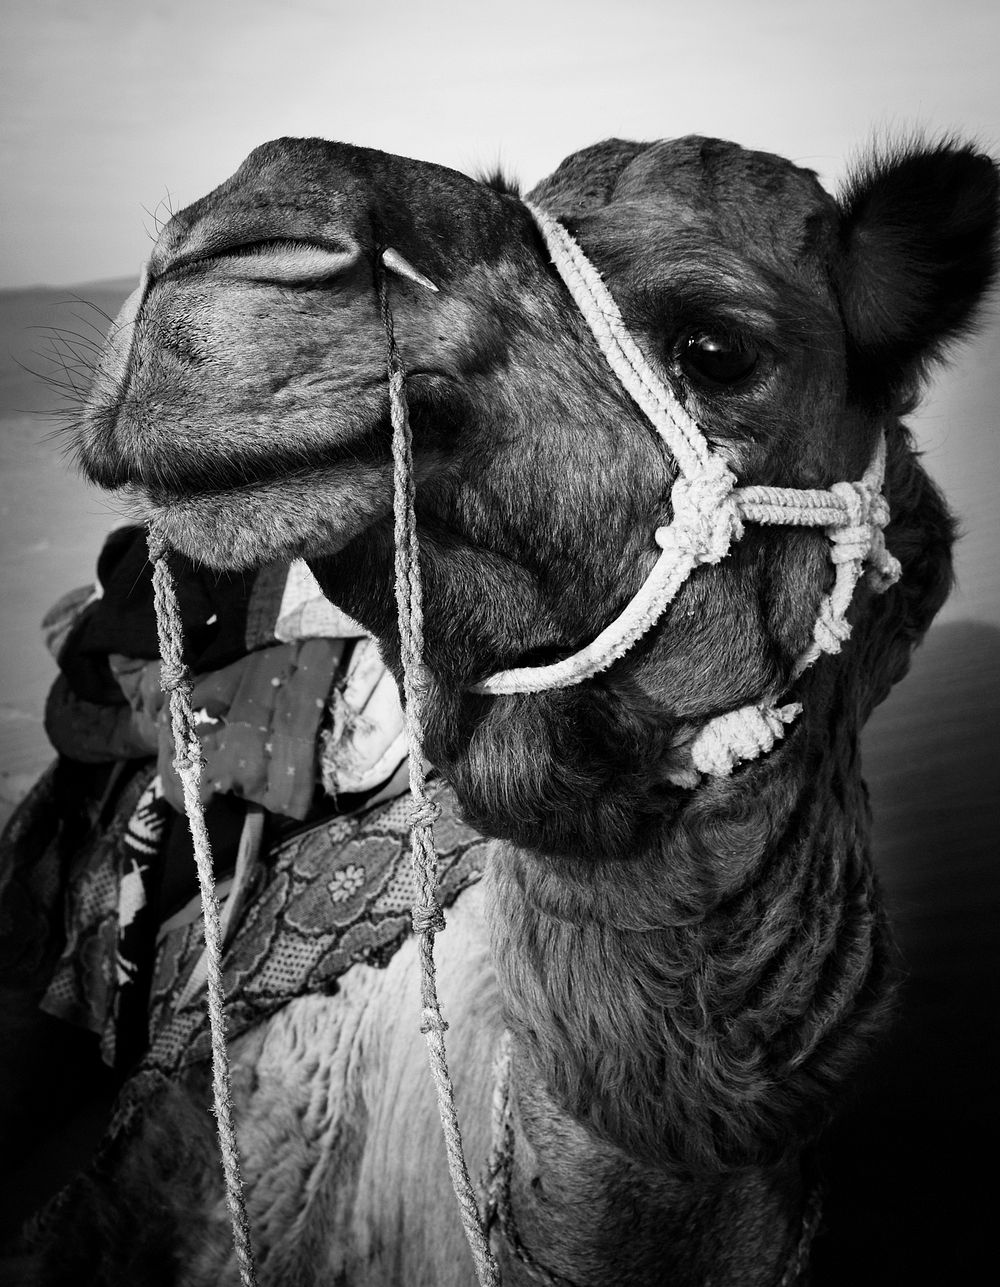 Johnie the Camel in the Thar Desert, Rajasthan, India. 